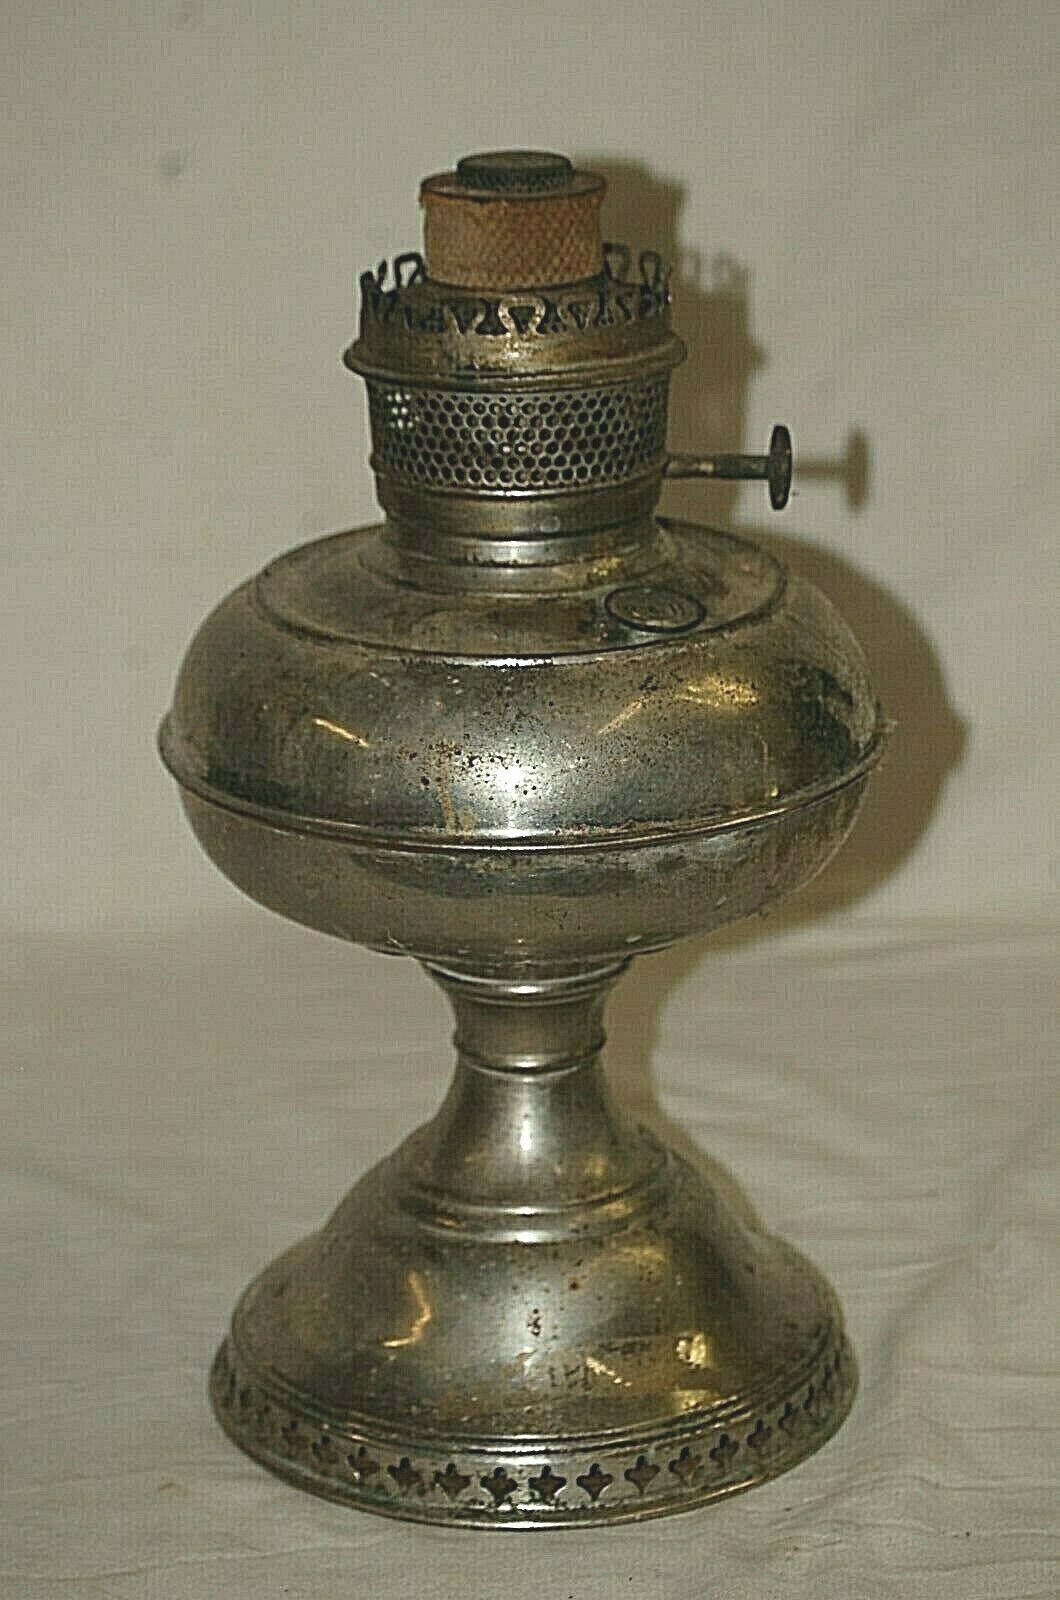 Primary image for Antique Bradley & Hubbard B&H Oil Lamp Pierced Base Replacement Parts Only